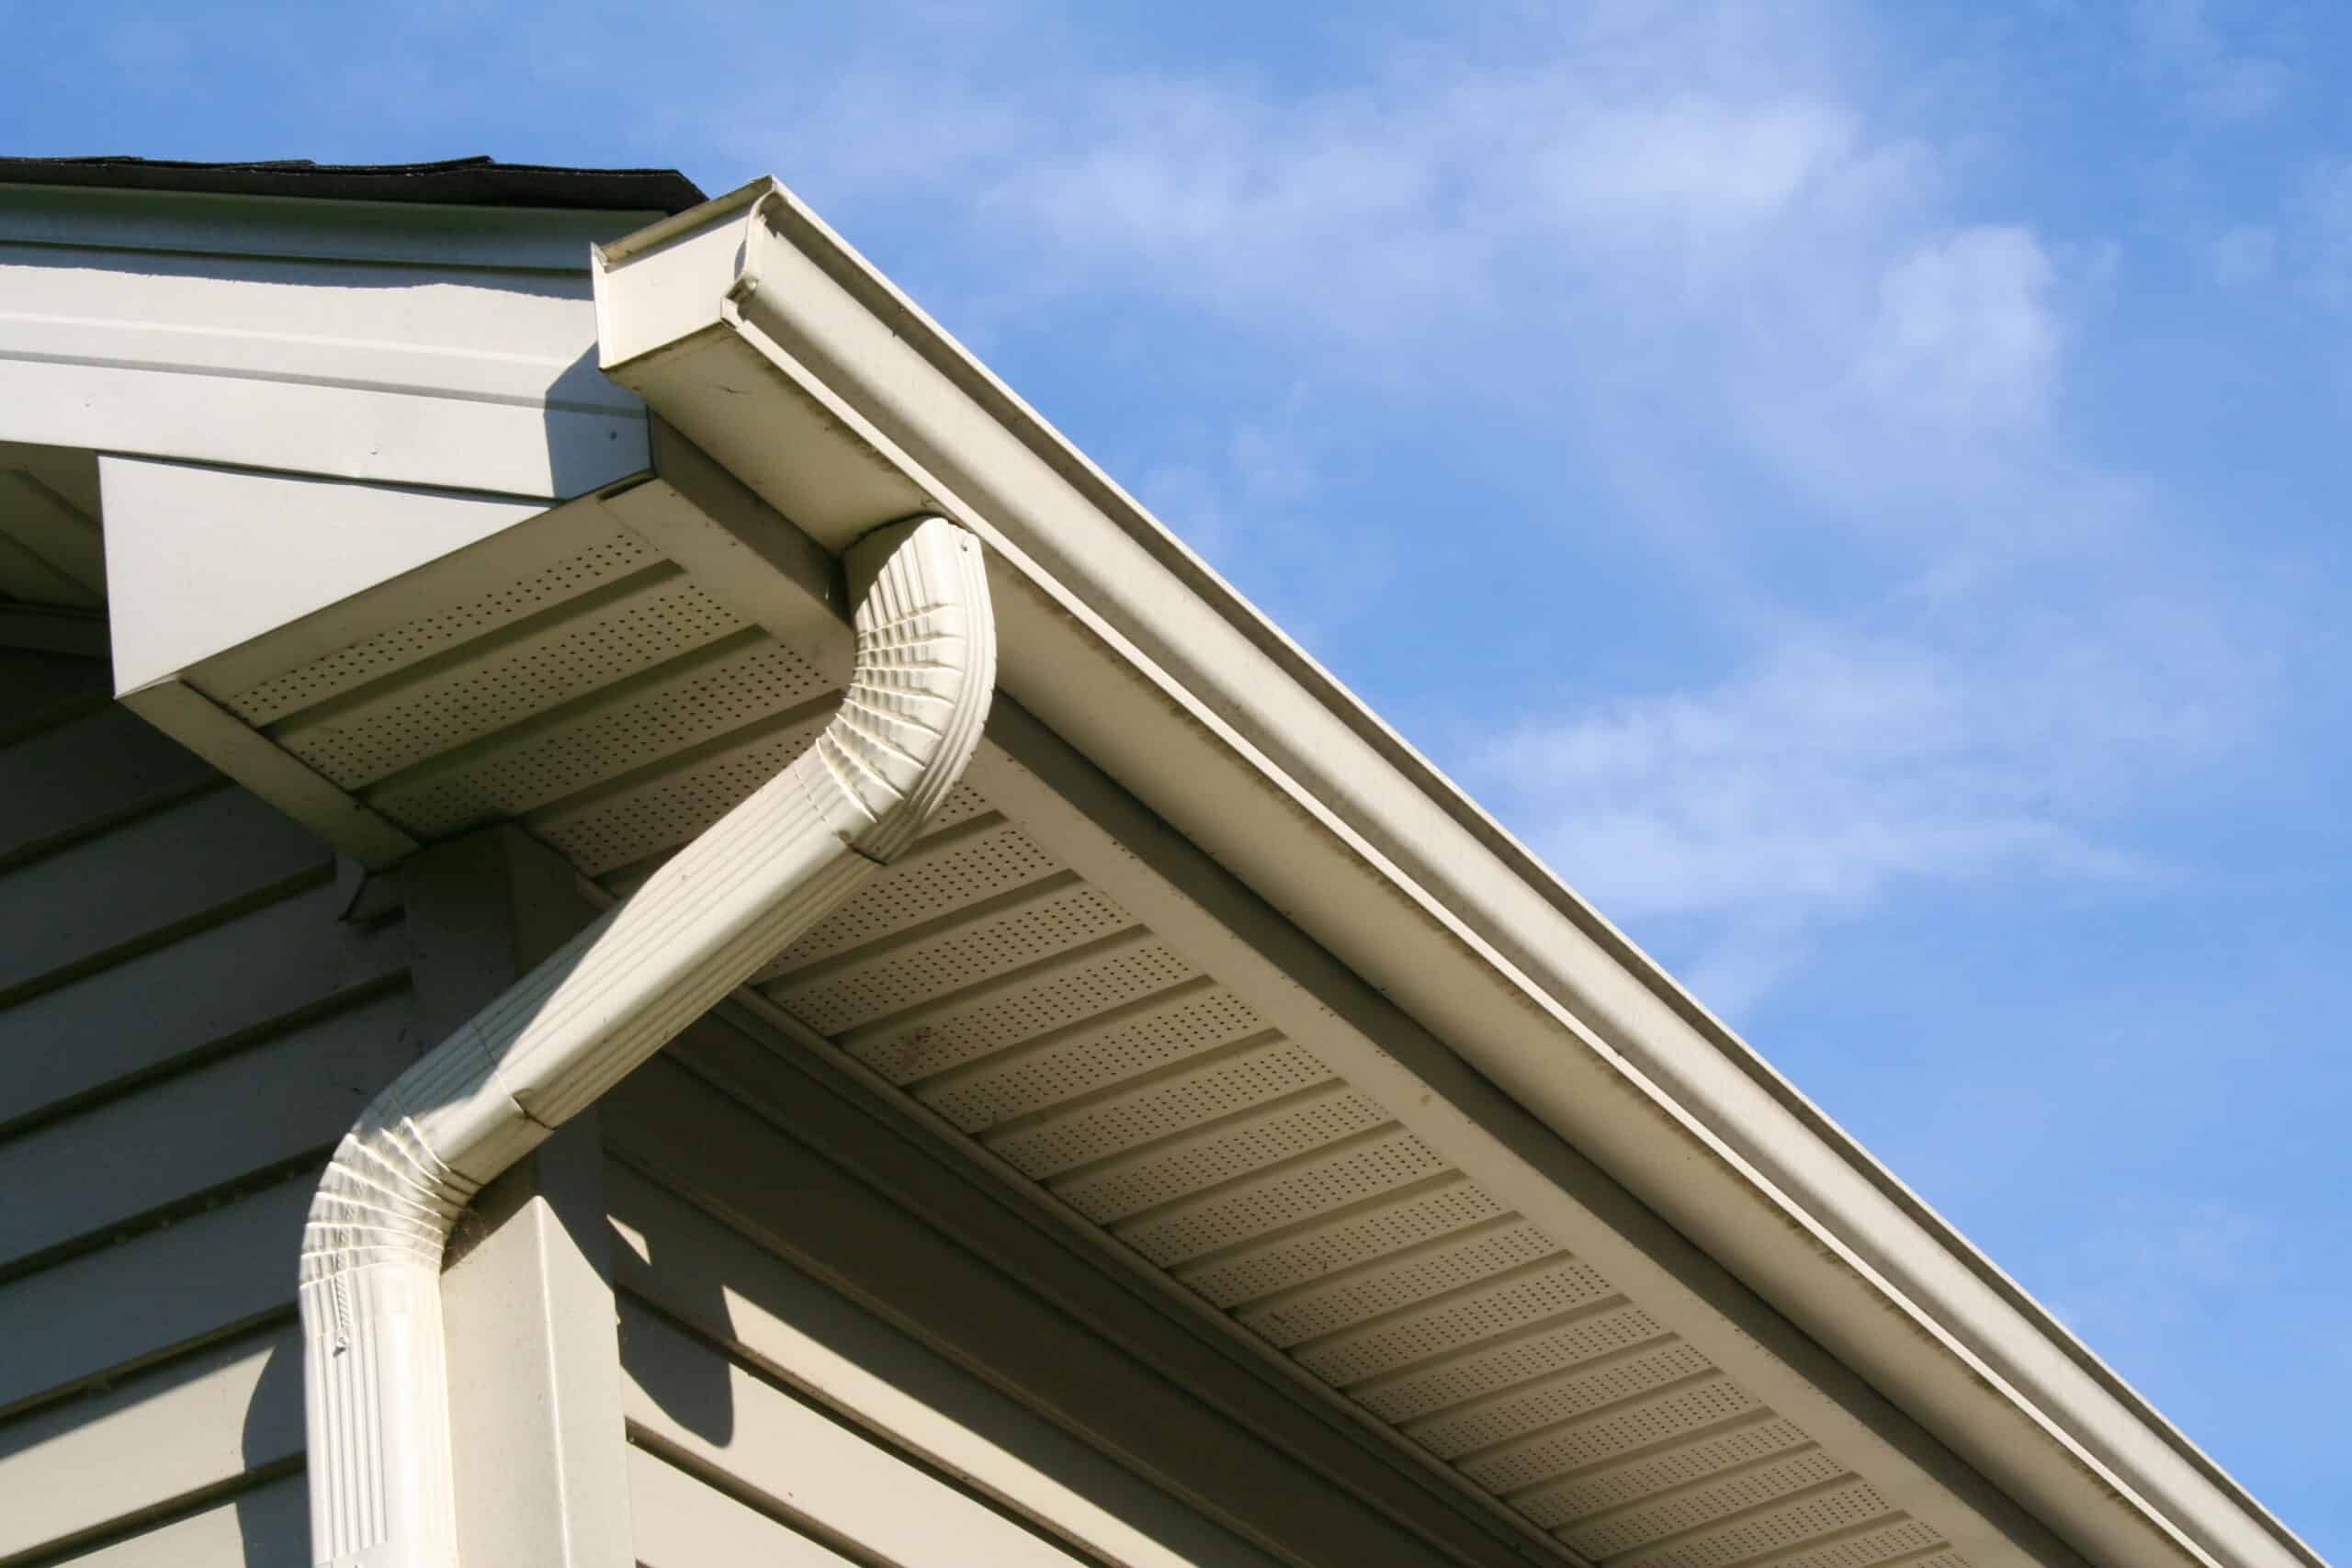 Angled view of gutter and downspout on a house. Blue sky in background.